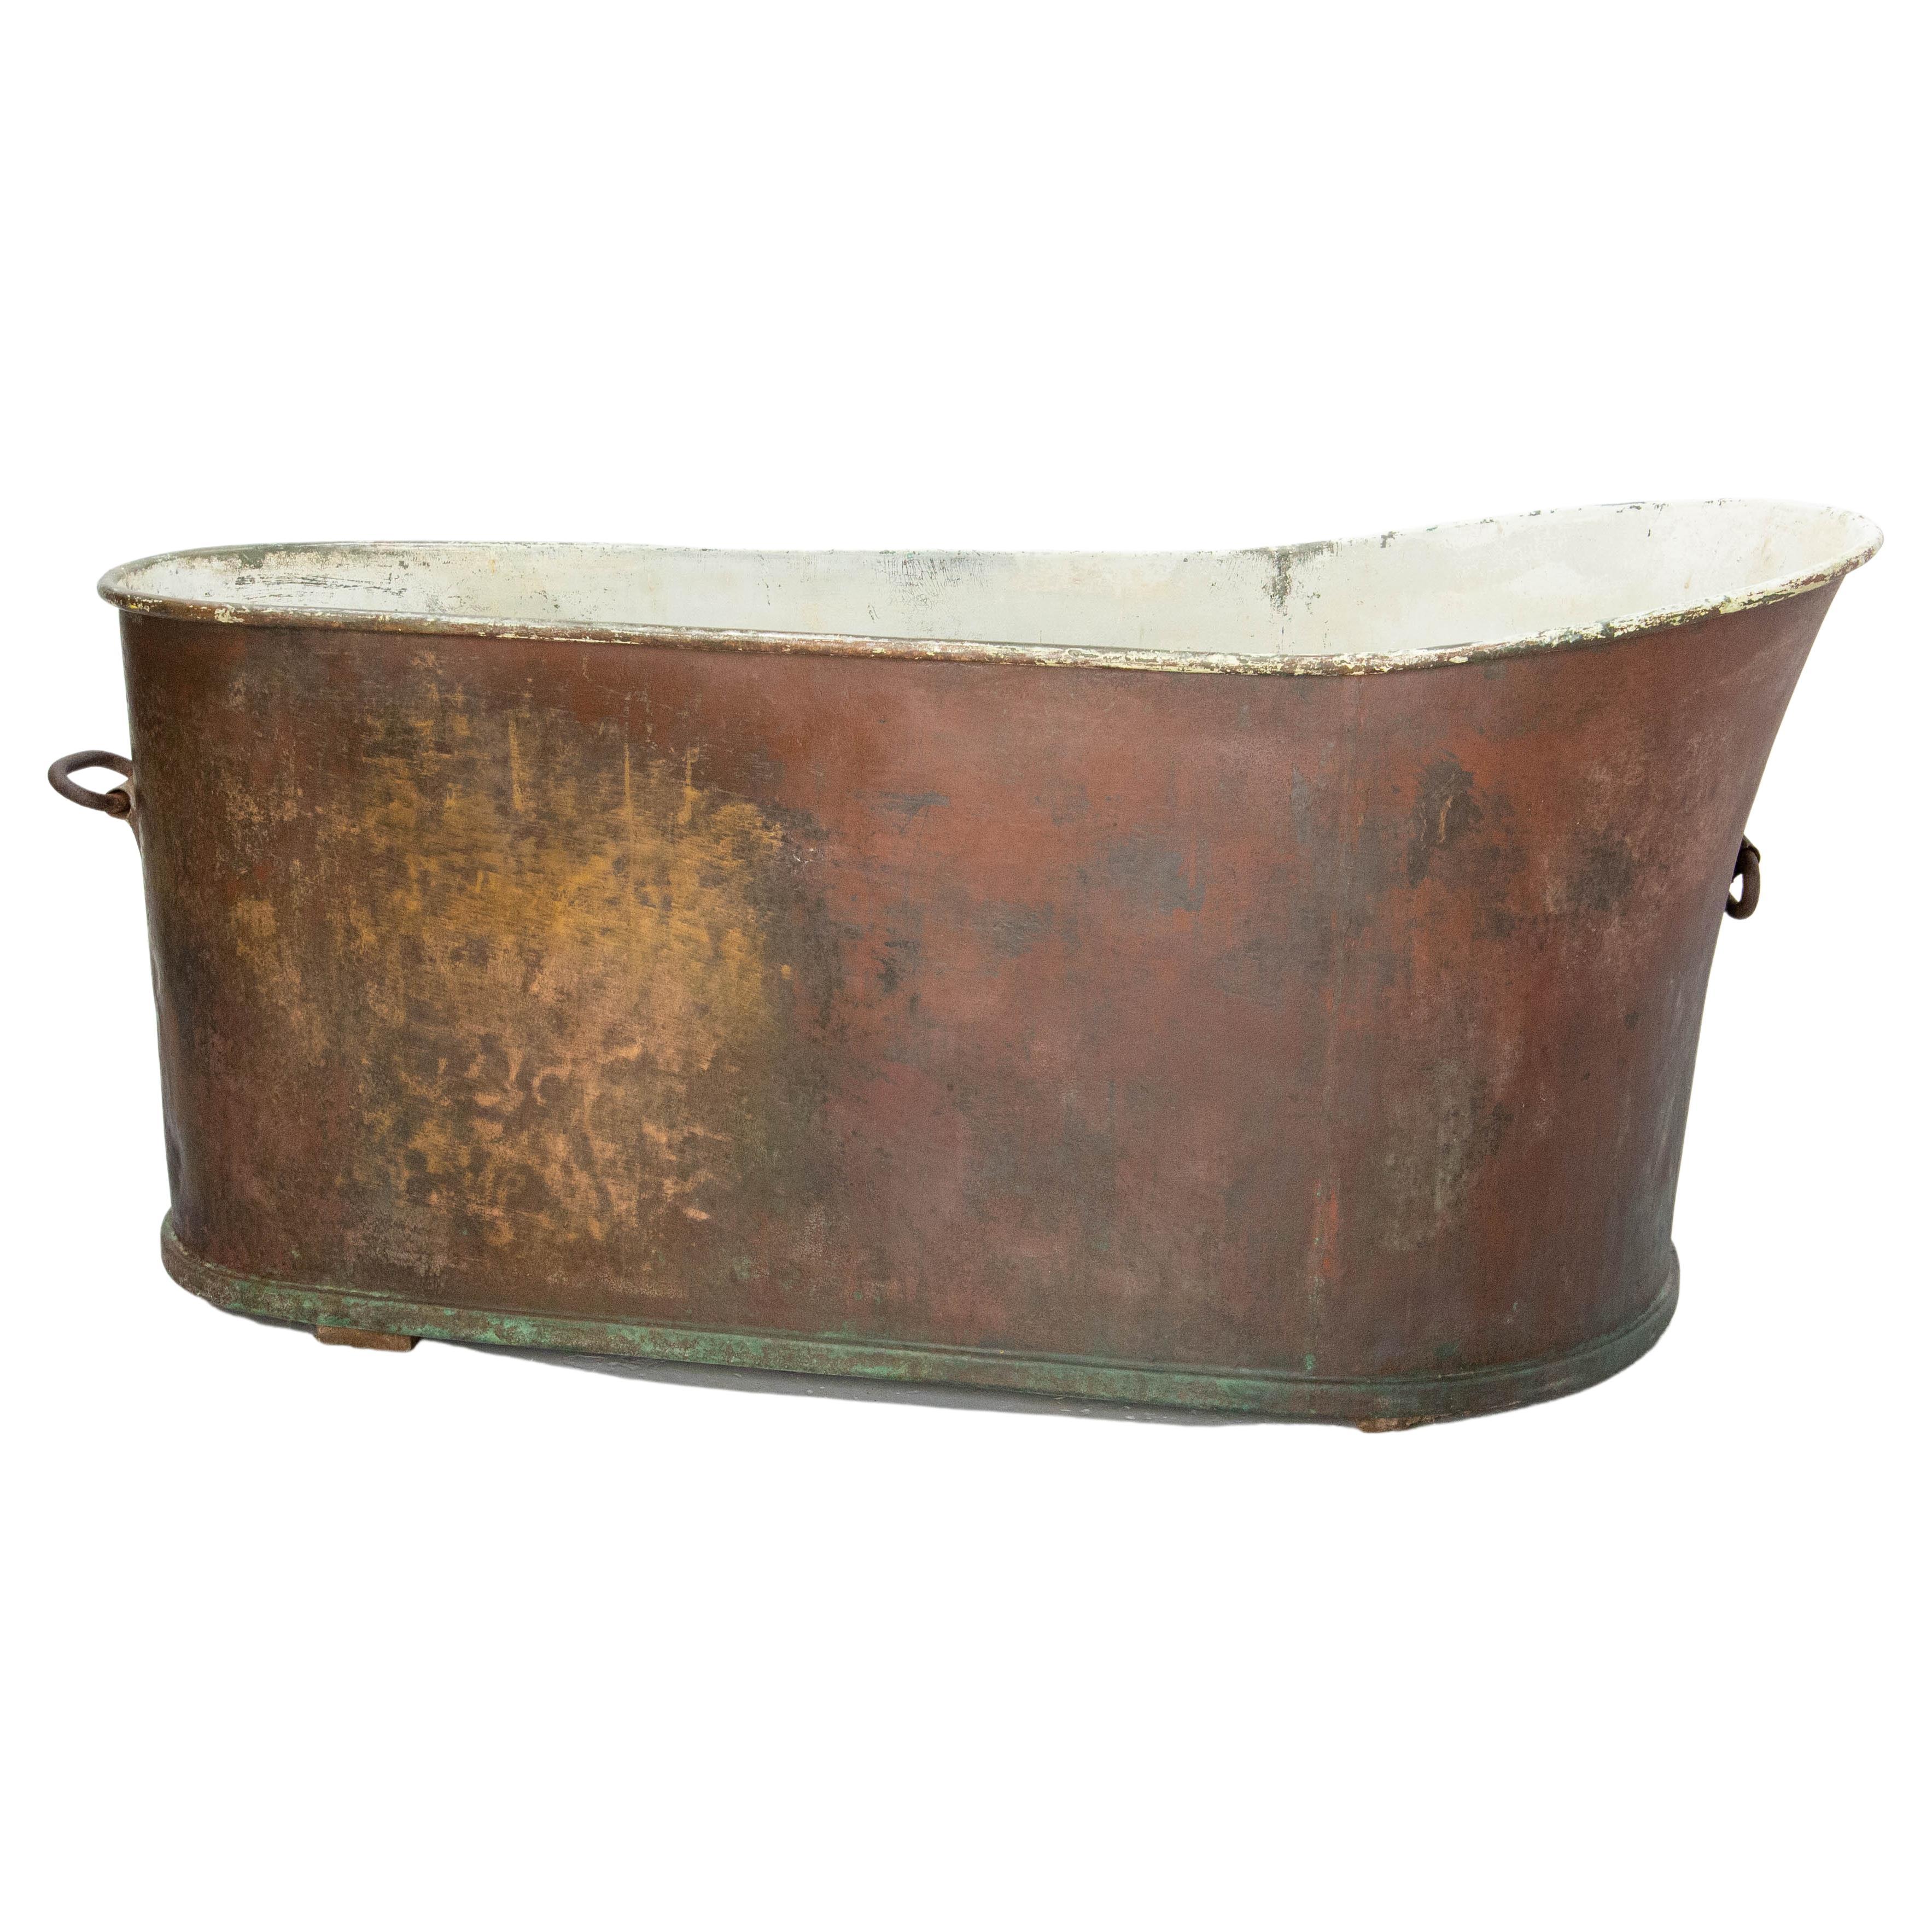 Antique French bathtub in copper.
Today it can be used like before as a bathtub, but it also can be used as a planter, a jardinière or, why not a a bin to keep drinks cool during a party.

Good authentic condition.

Shipping:
69 / 155 / 74 cm 55 kg